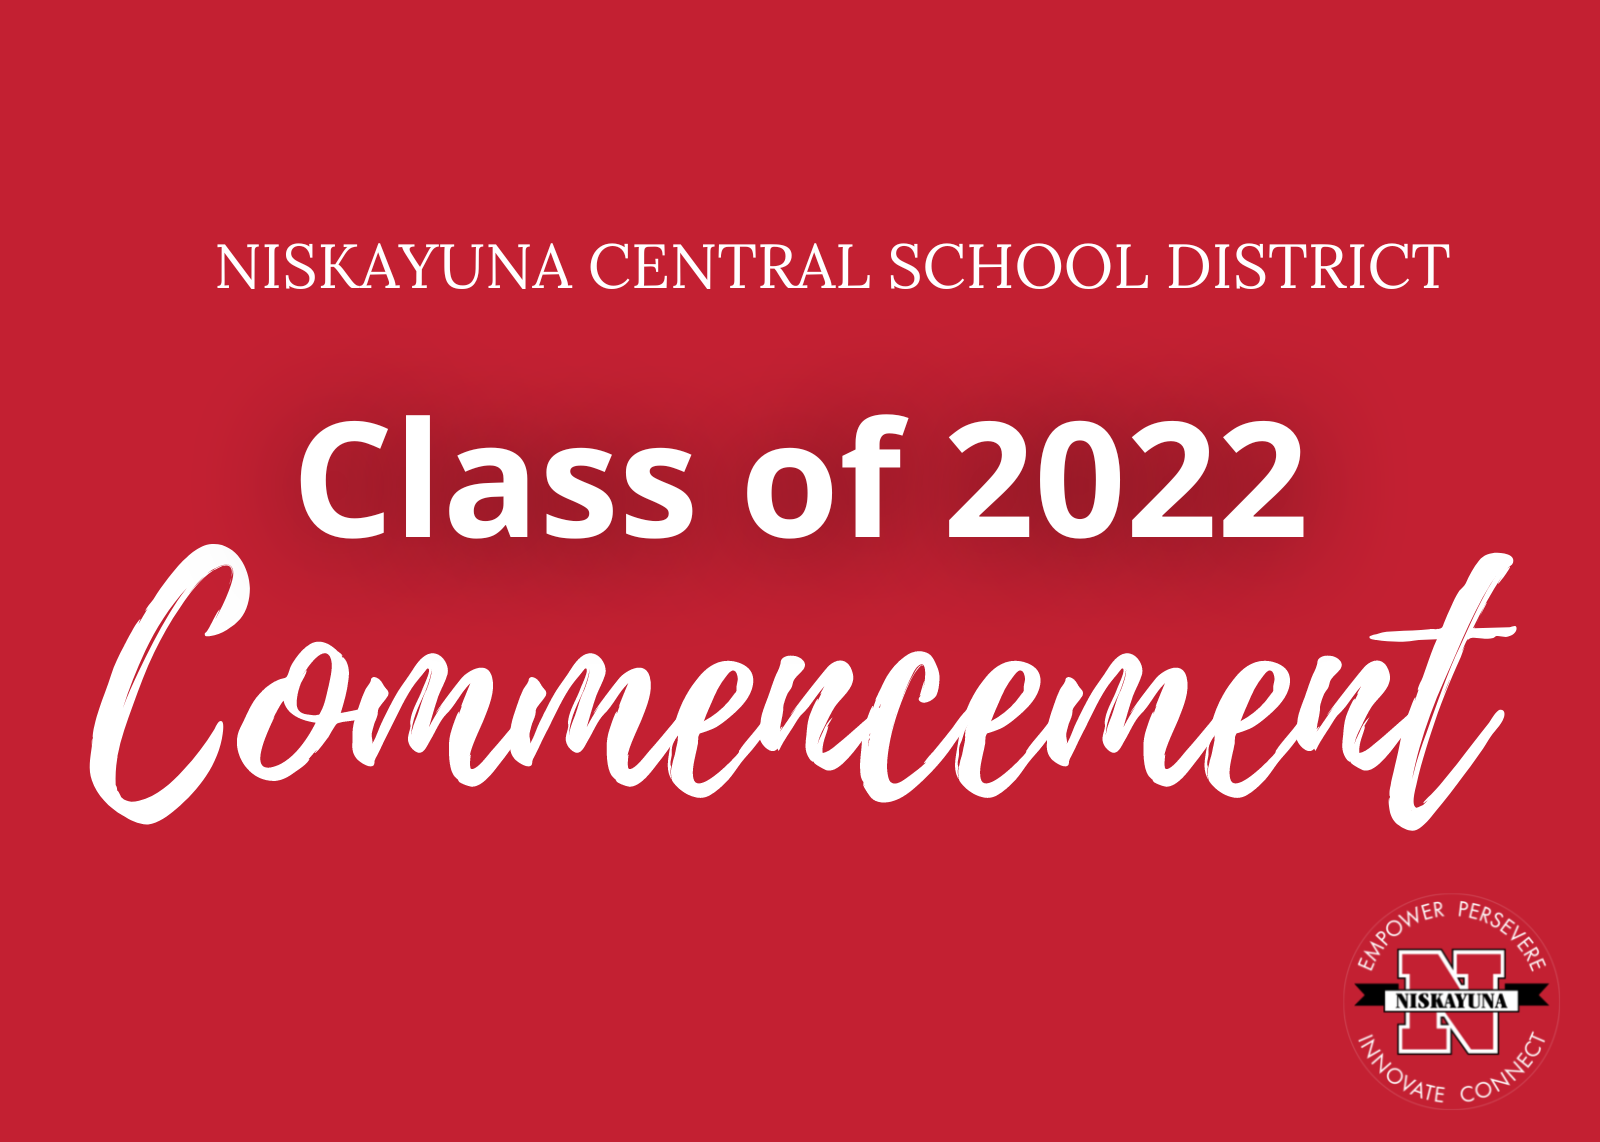 Red slide with text that read Niskayuna Central School District Class of 2022 Commencement